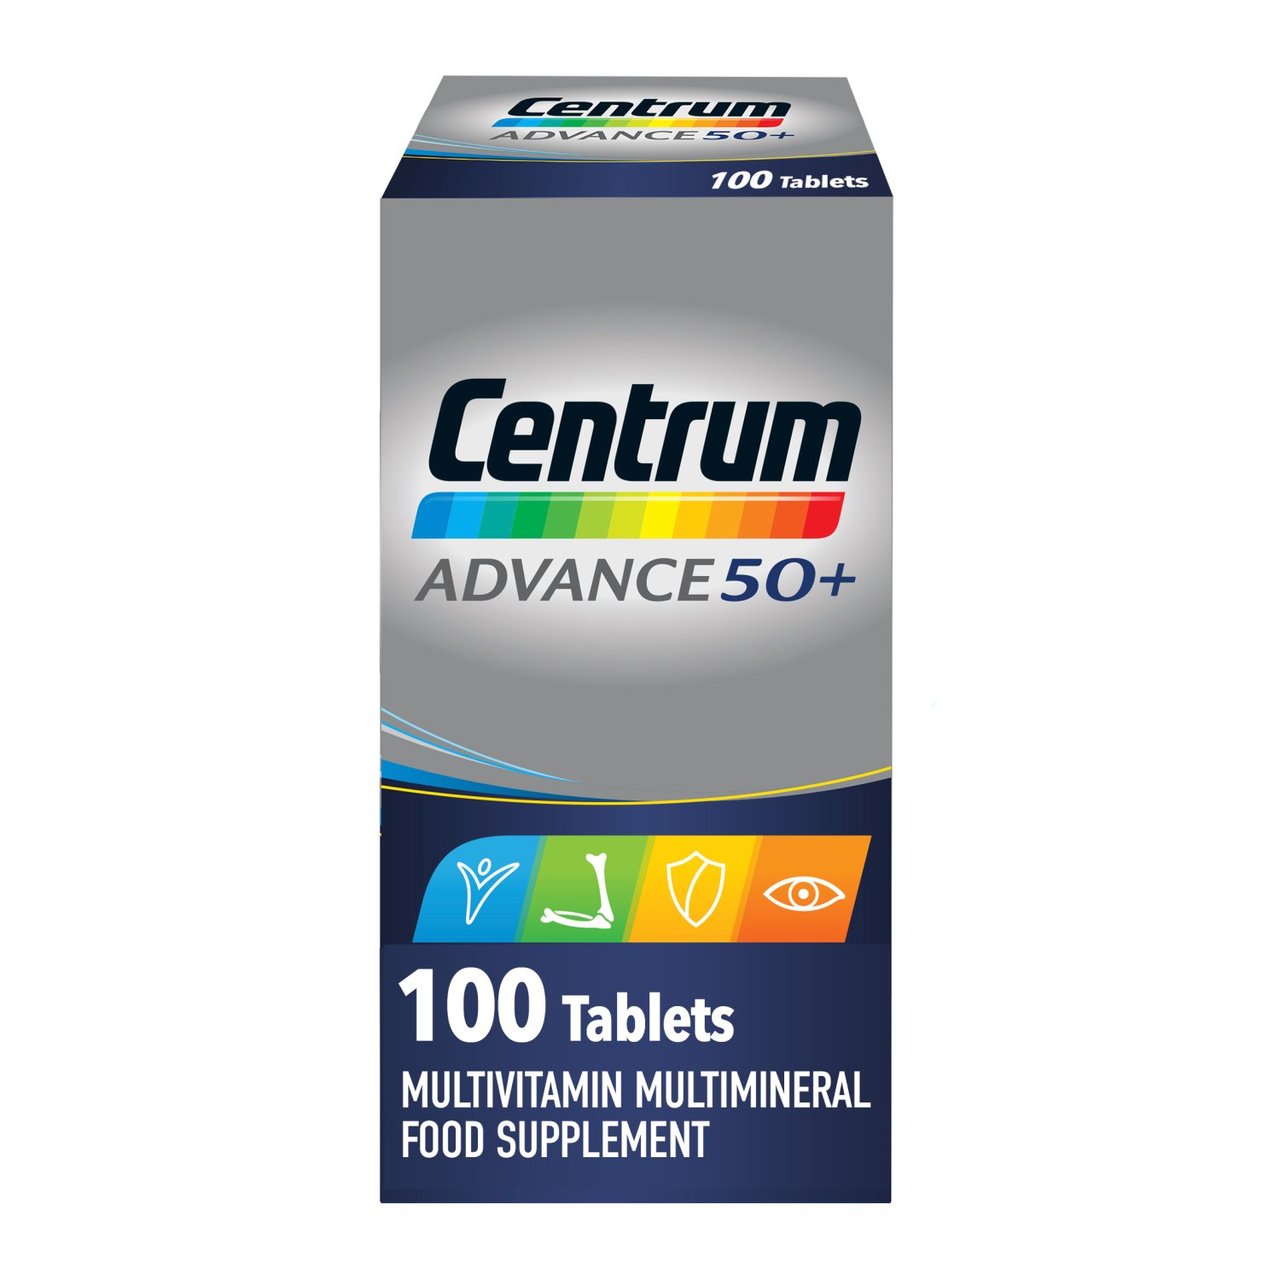 Centrum Advance 50+ Multivitamin Supplement Tablets 100 Pack RRP 12.50 CLEARANCE XL 9.99